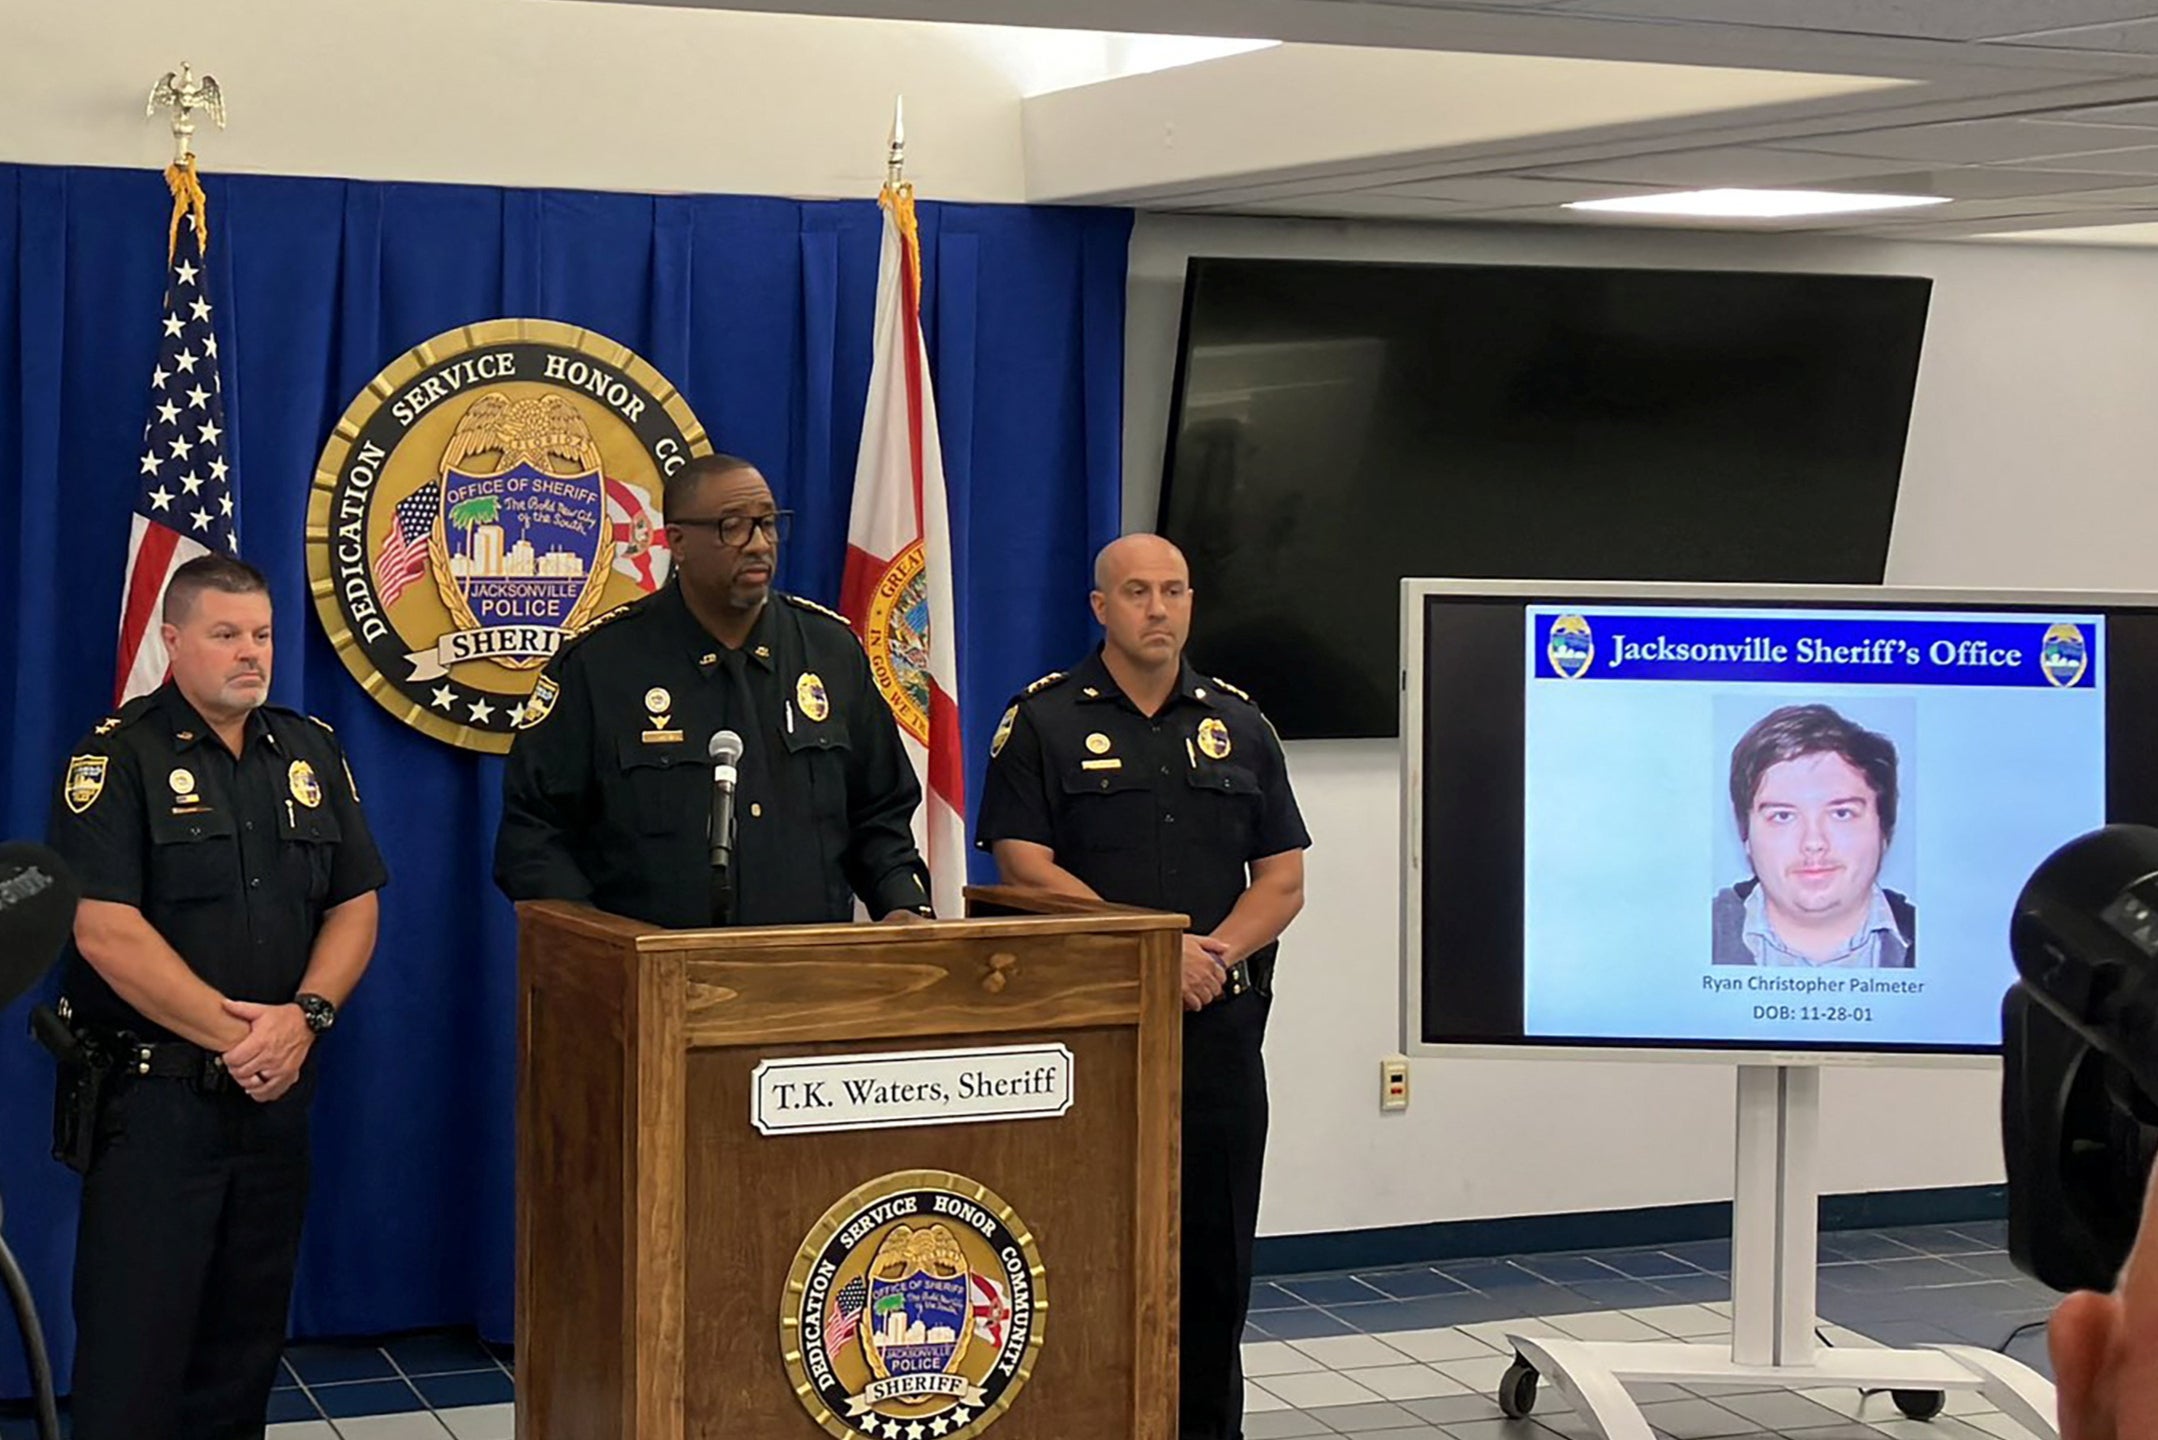 The photograph of Ryan Christopher Palmeter, 21, is shown at a news conference after being identified by Sheriff TK Waters as the white man who killed three Black people before shooting himself at a Dollar General store